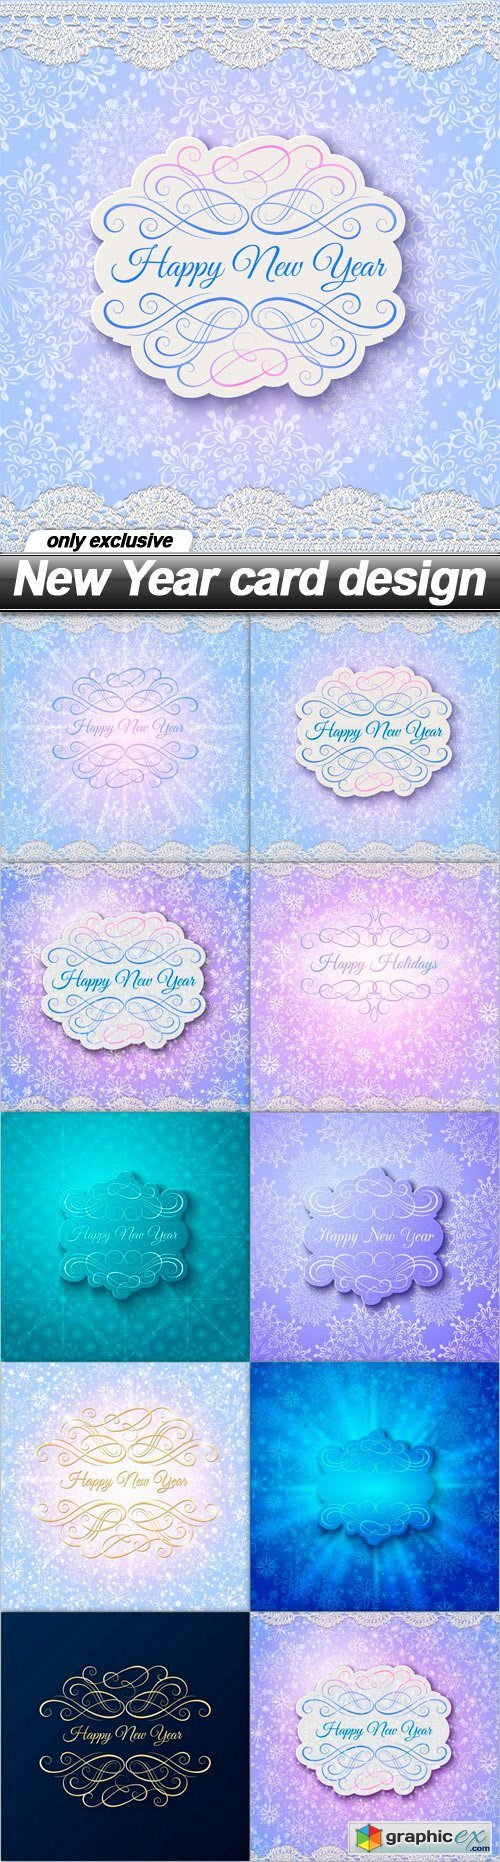 New Year card design - 10 EPS